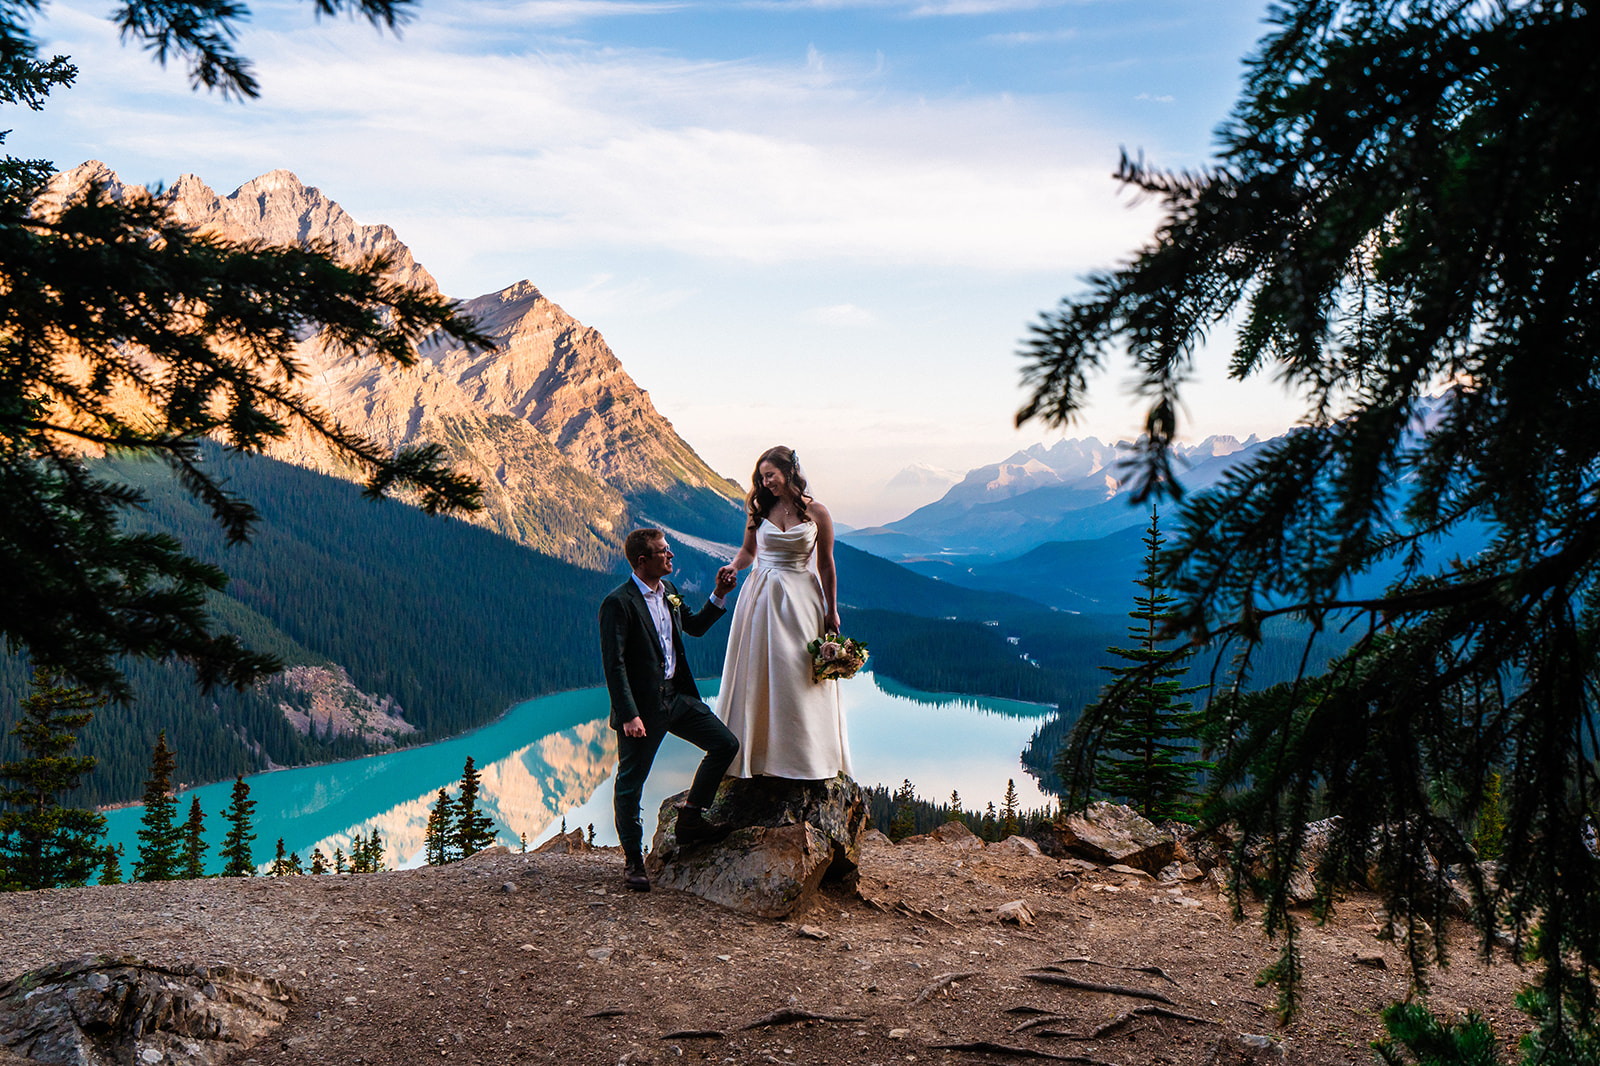 Bride and groom posing in the mountains of Banff, Canada